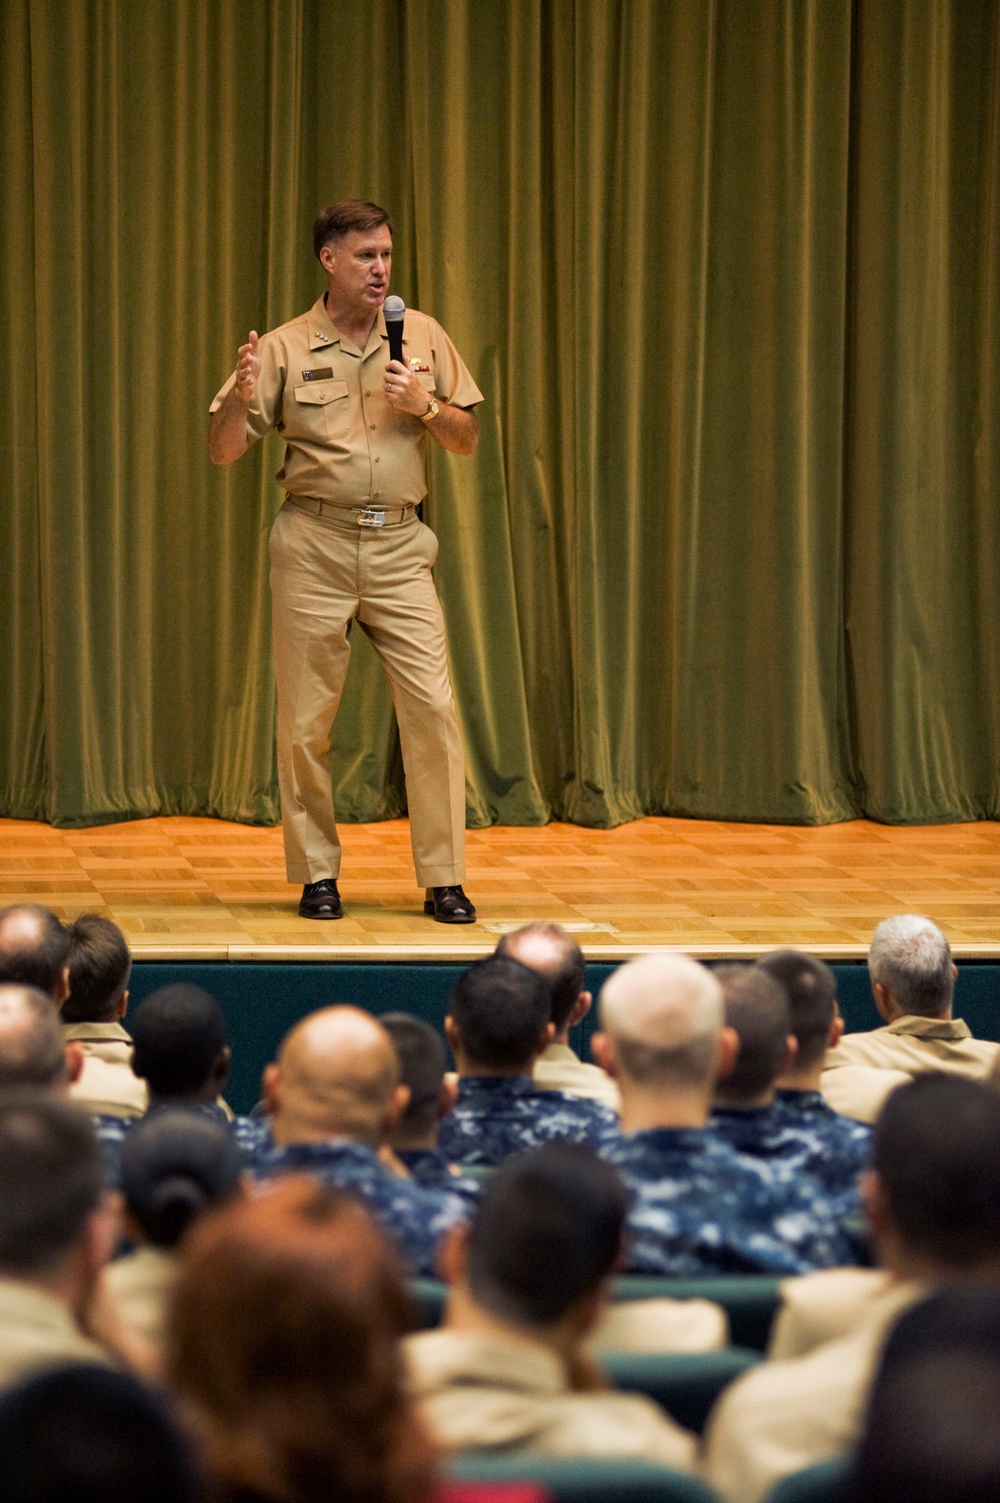 Chief of Naval Personnel Visits NSA Naples